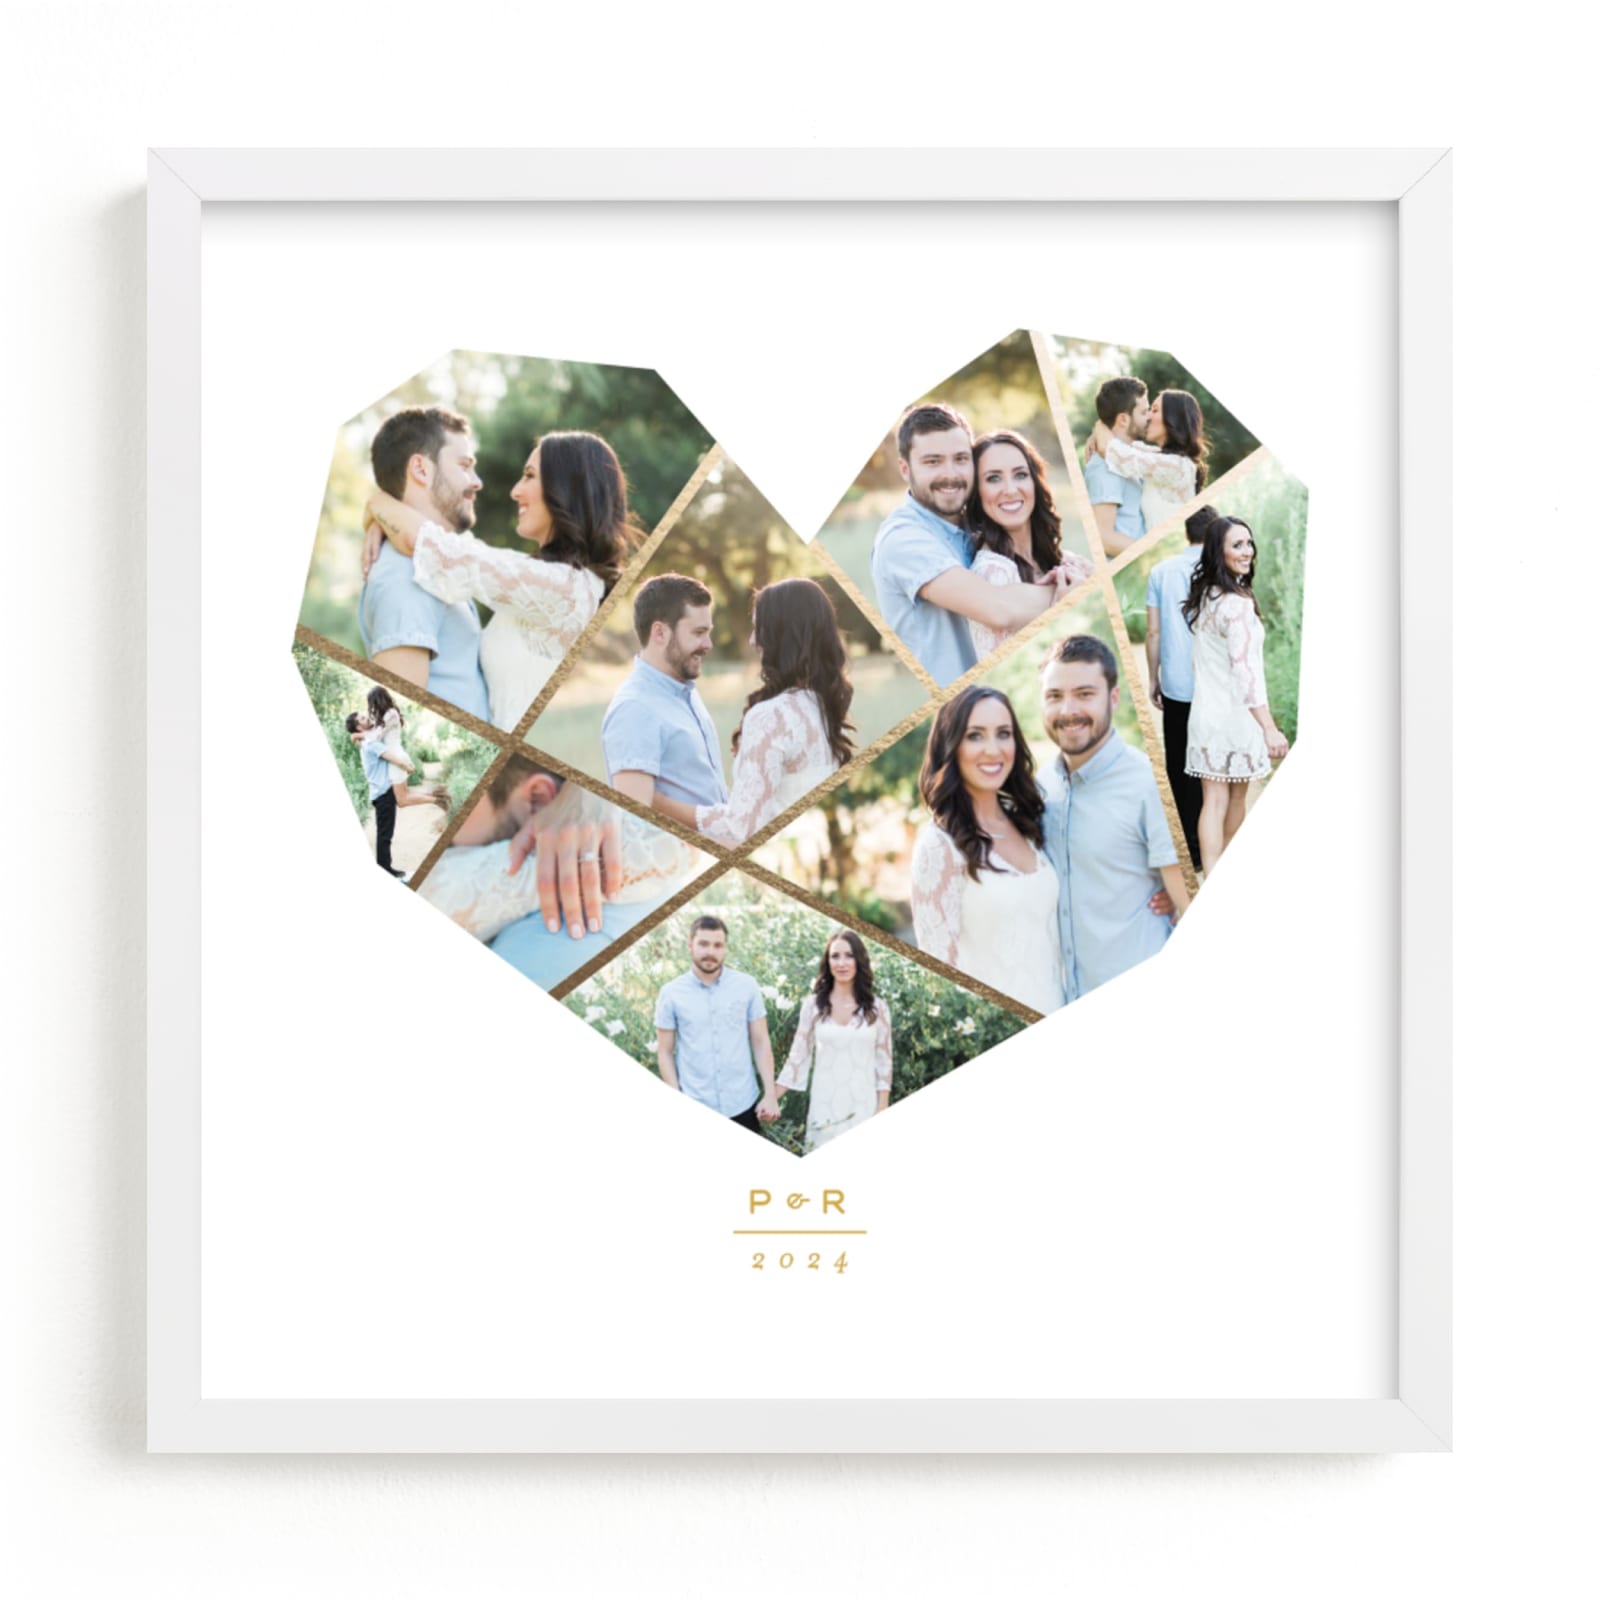 This is a gold foil stamped photo art by fatfatin called Complete Love Foil.